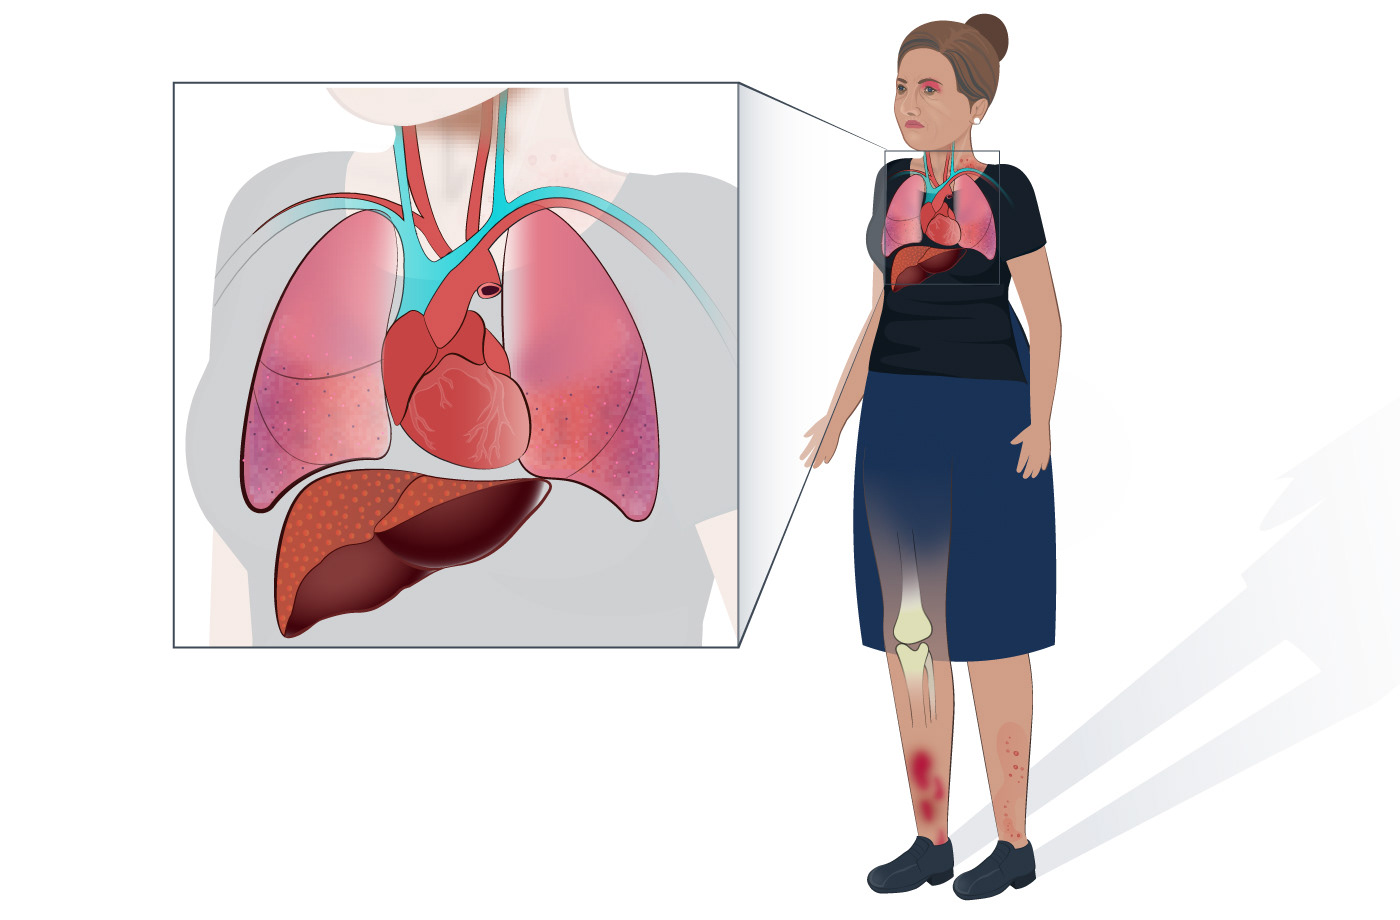 Medical Illustration of the Pathophysiology of Sarcoidosis